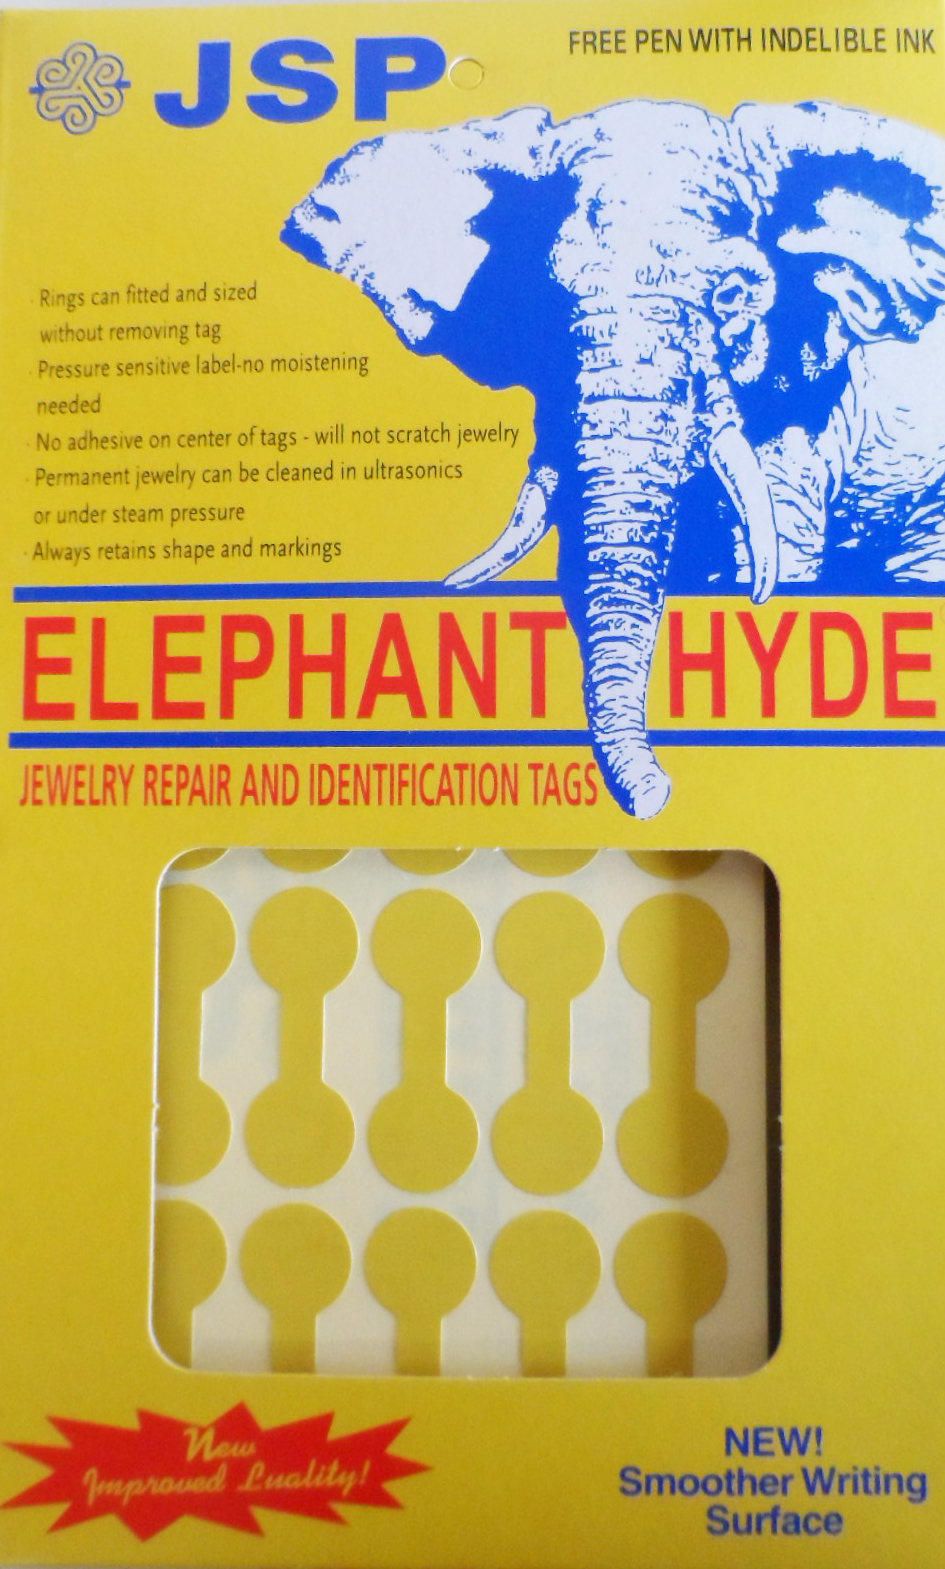 ELEPHANT HYDE TAGS GOLD REGULAR 1000 PIECES - Click Image to Close